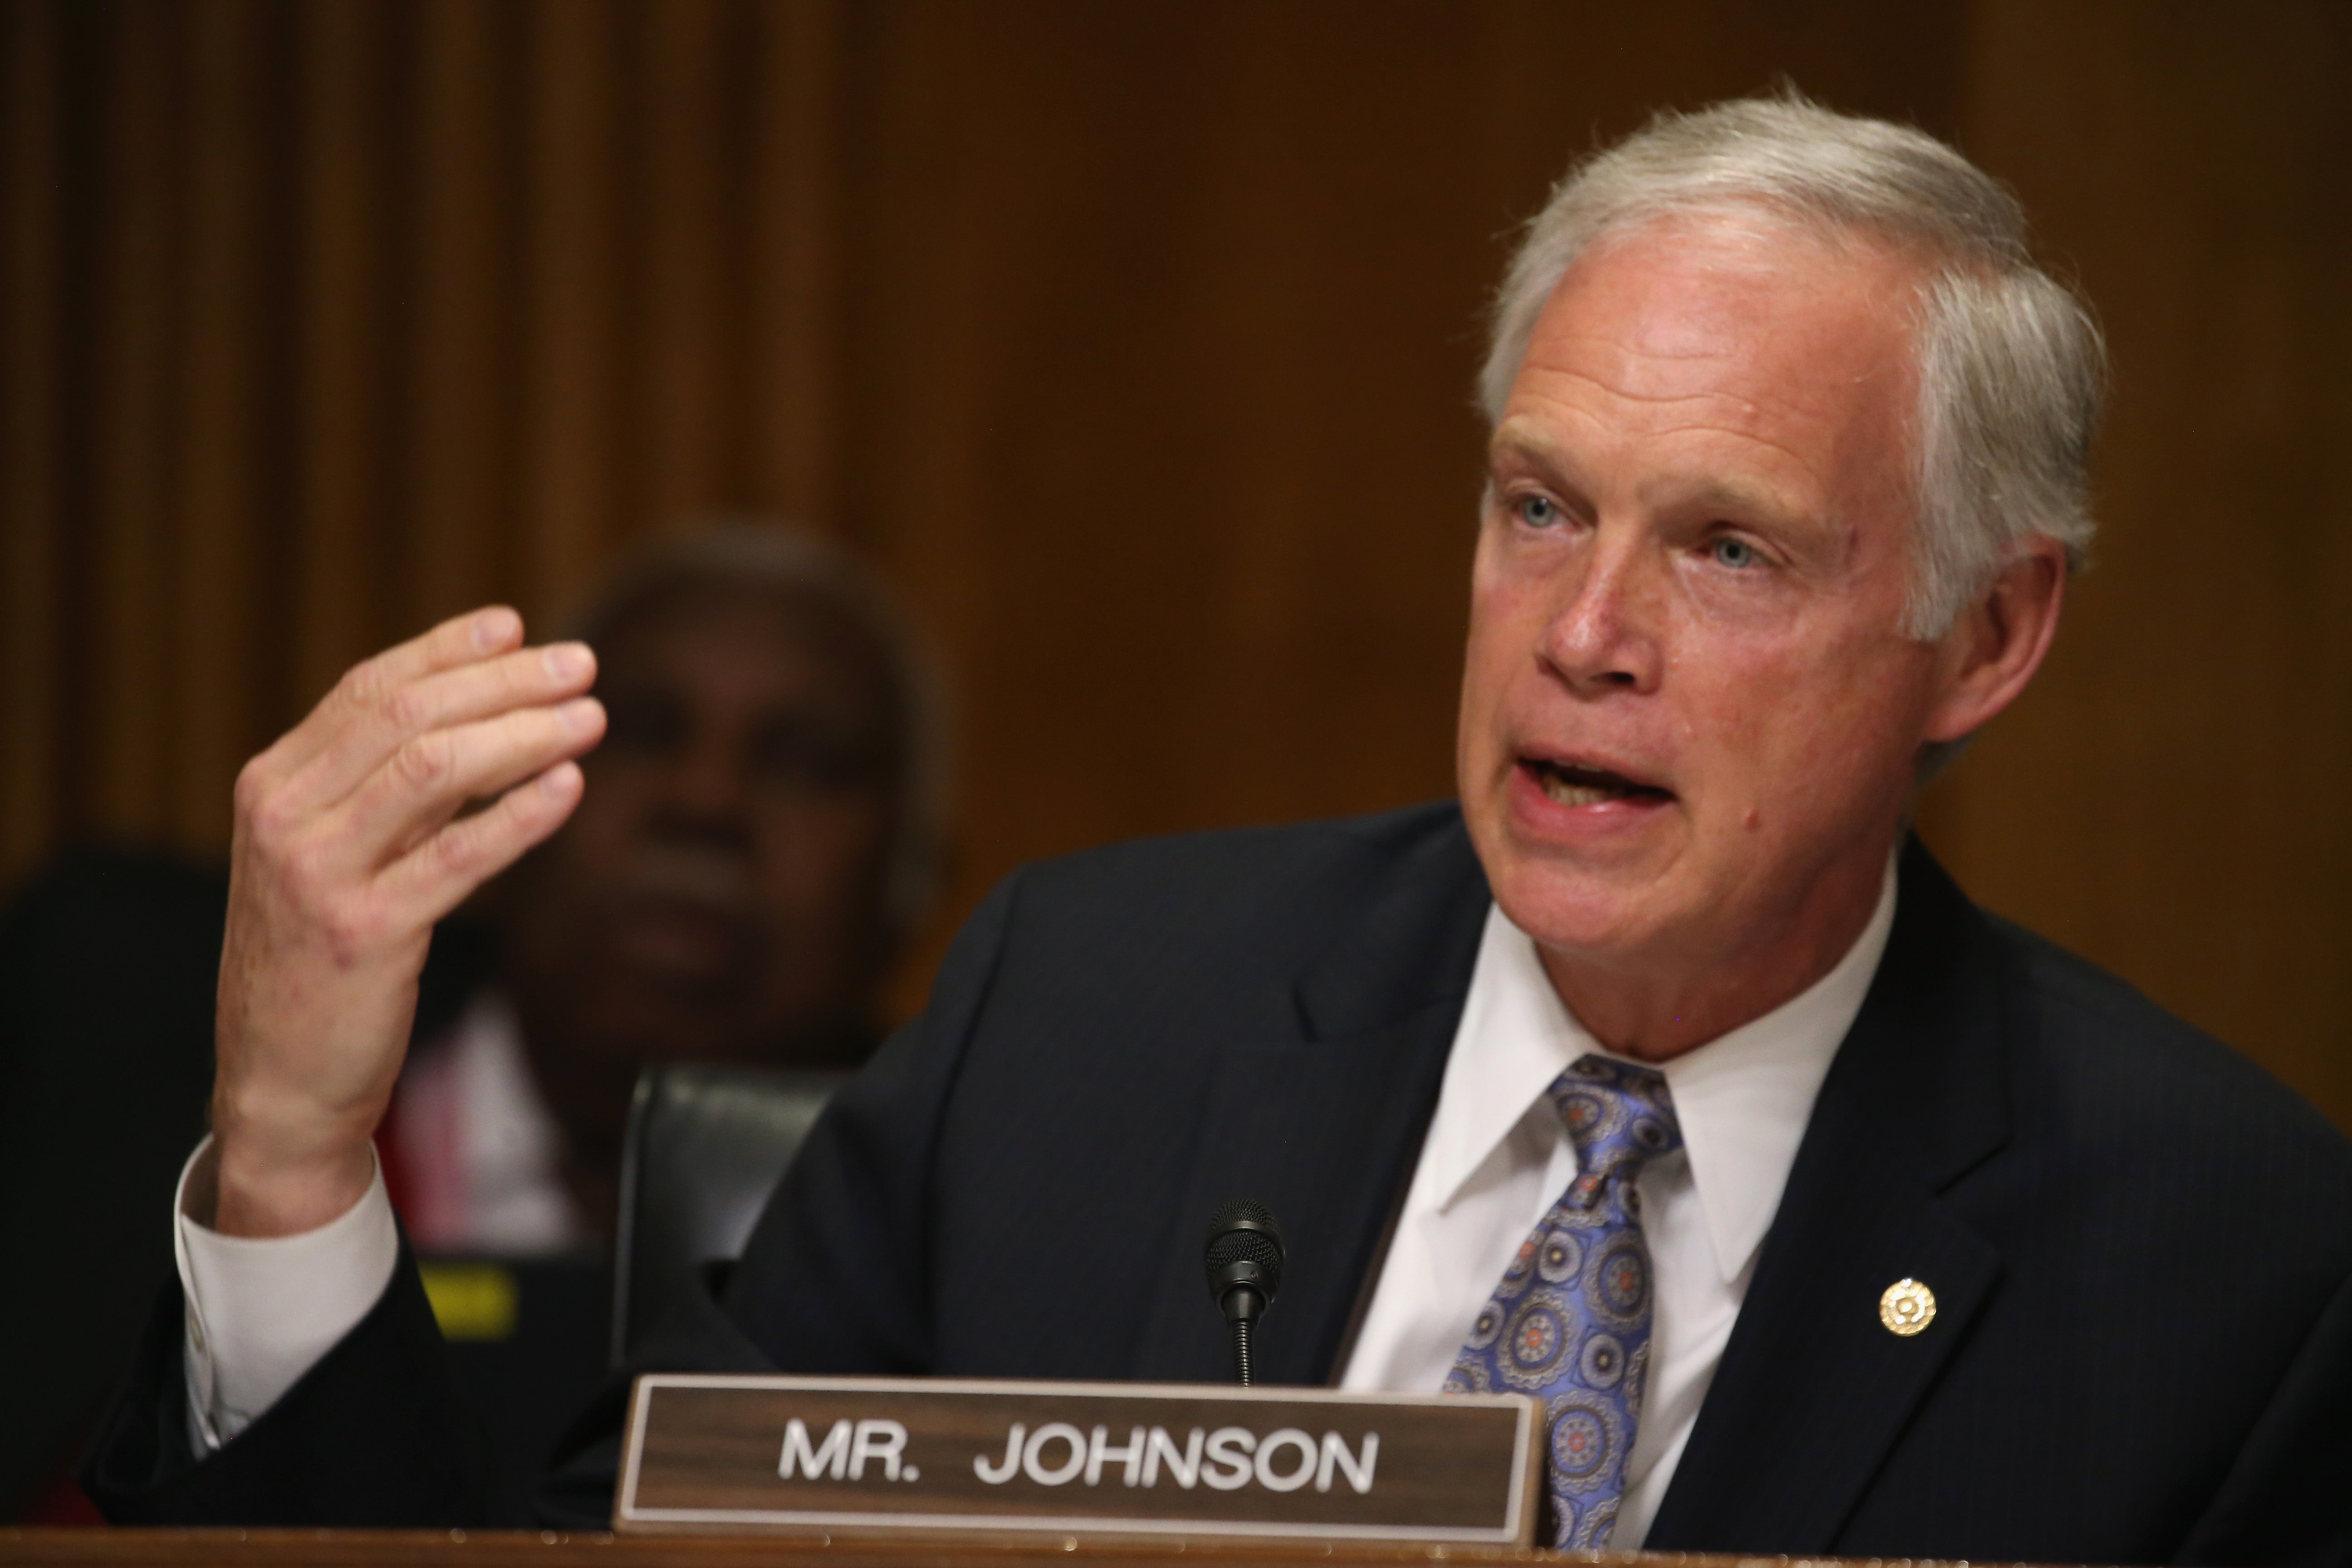 File Image: Senator Ron Johnson participates in a committee hearing on Capitol Hill, 10 March 2015 in Washington, DC